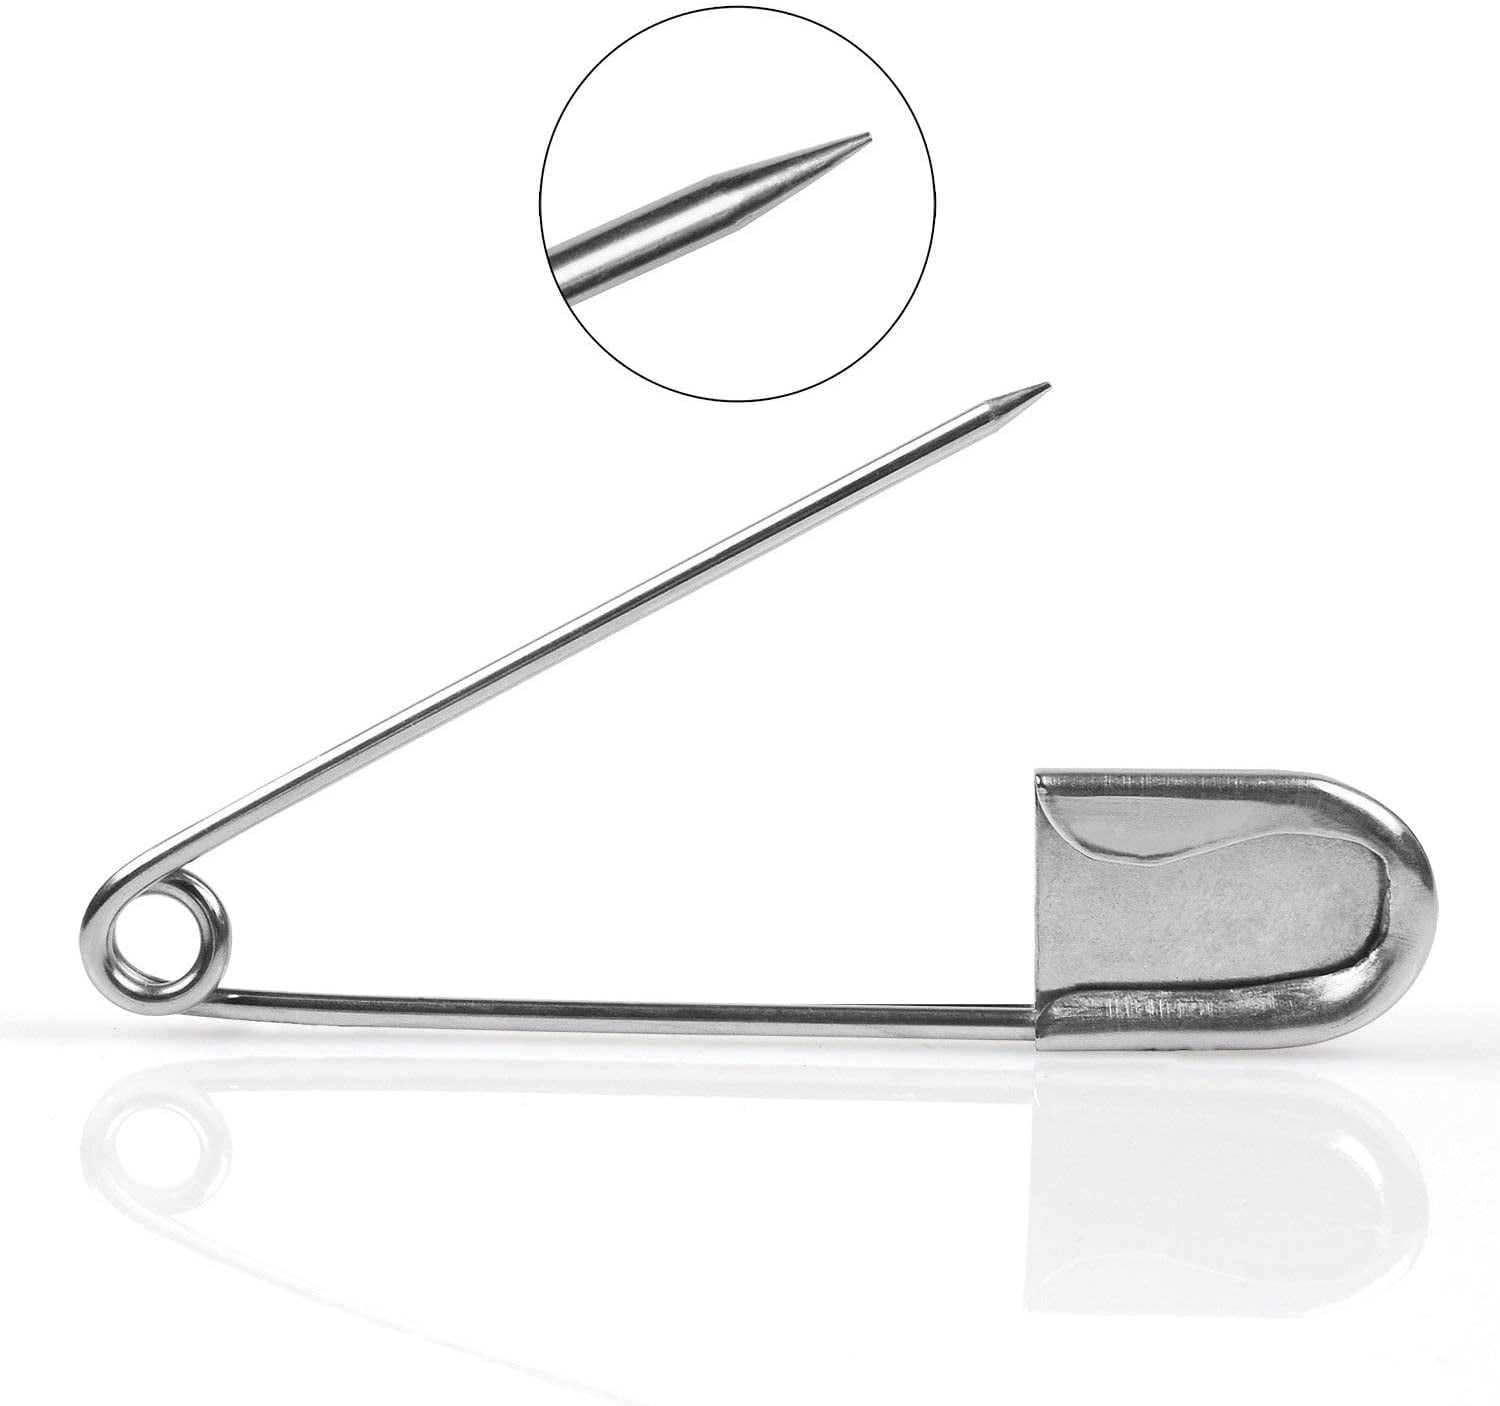  Outus 30 Pieces Extra Large Safety Pins Stainless Steel Heavy  Duty Safety Pins for Blankets, Skirts, Kilts (4 Inch and 3 Inch)